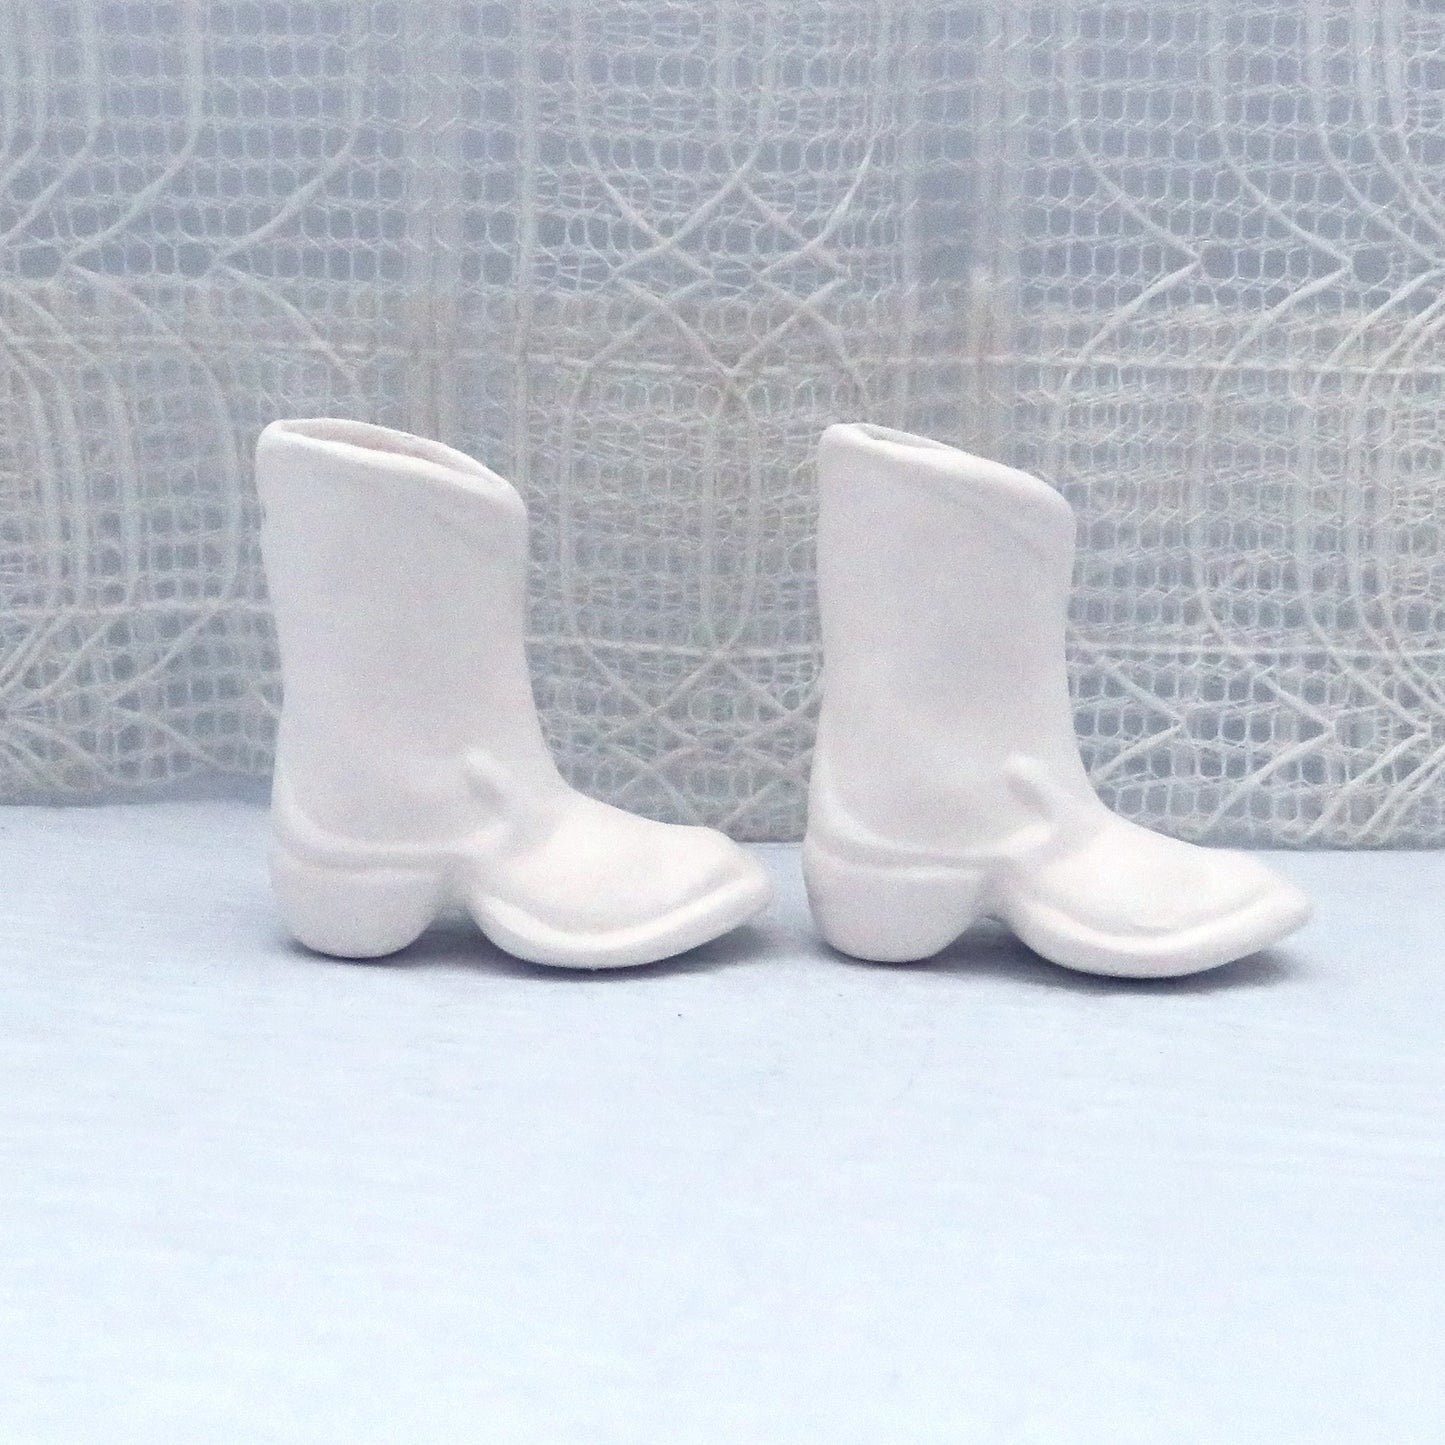 1 set of 2 ready to paint ceramic boots with toes to the right